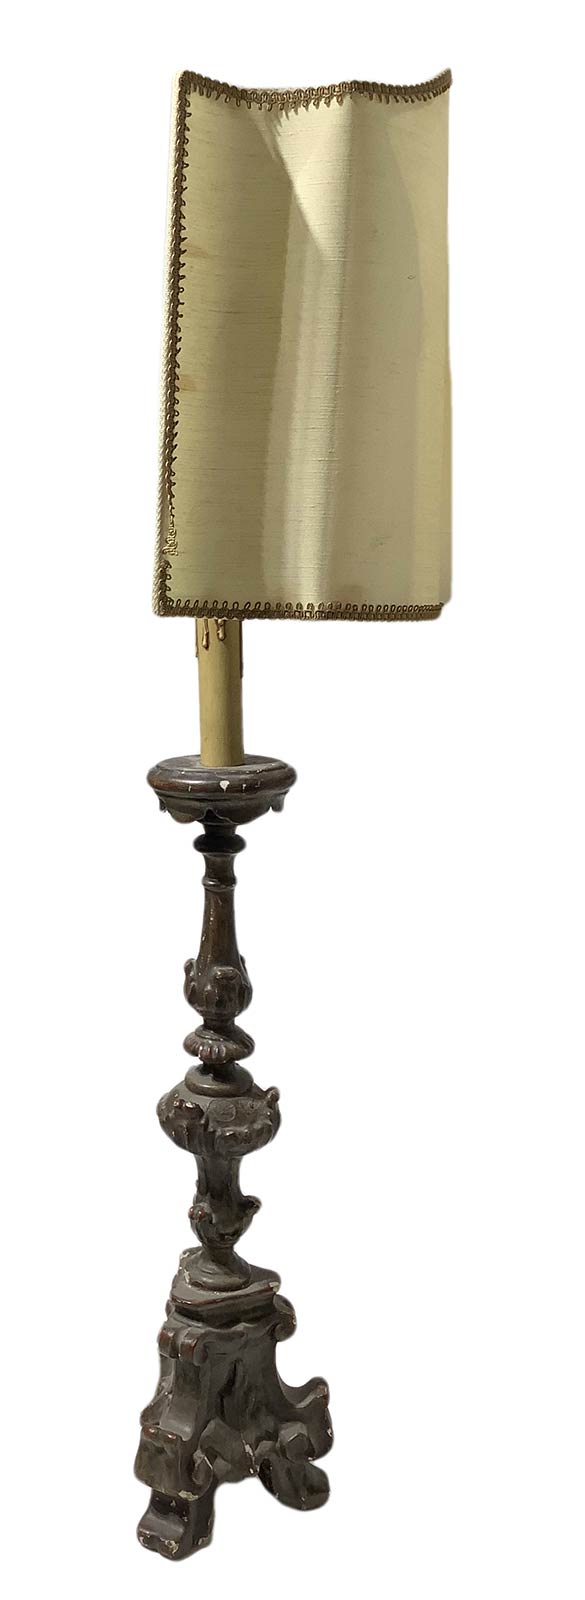 Candlestick in lacquered wood, eighteenth century. H 70 cm. - Image 2 of 7